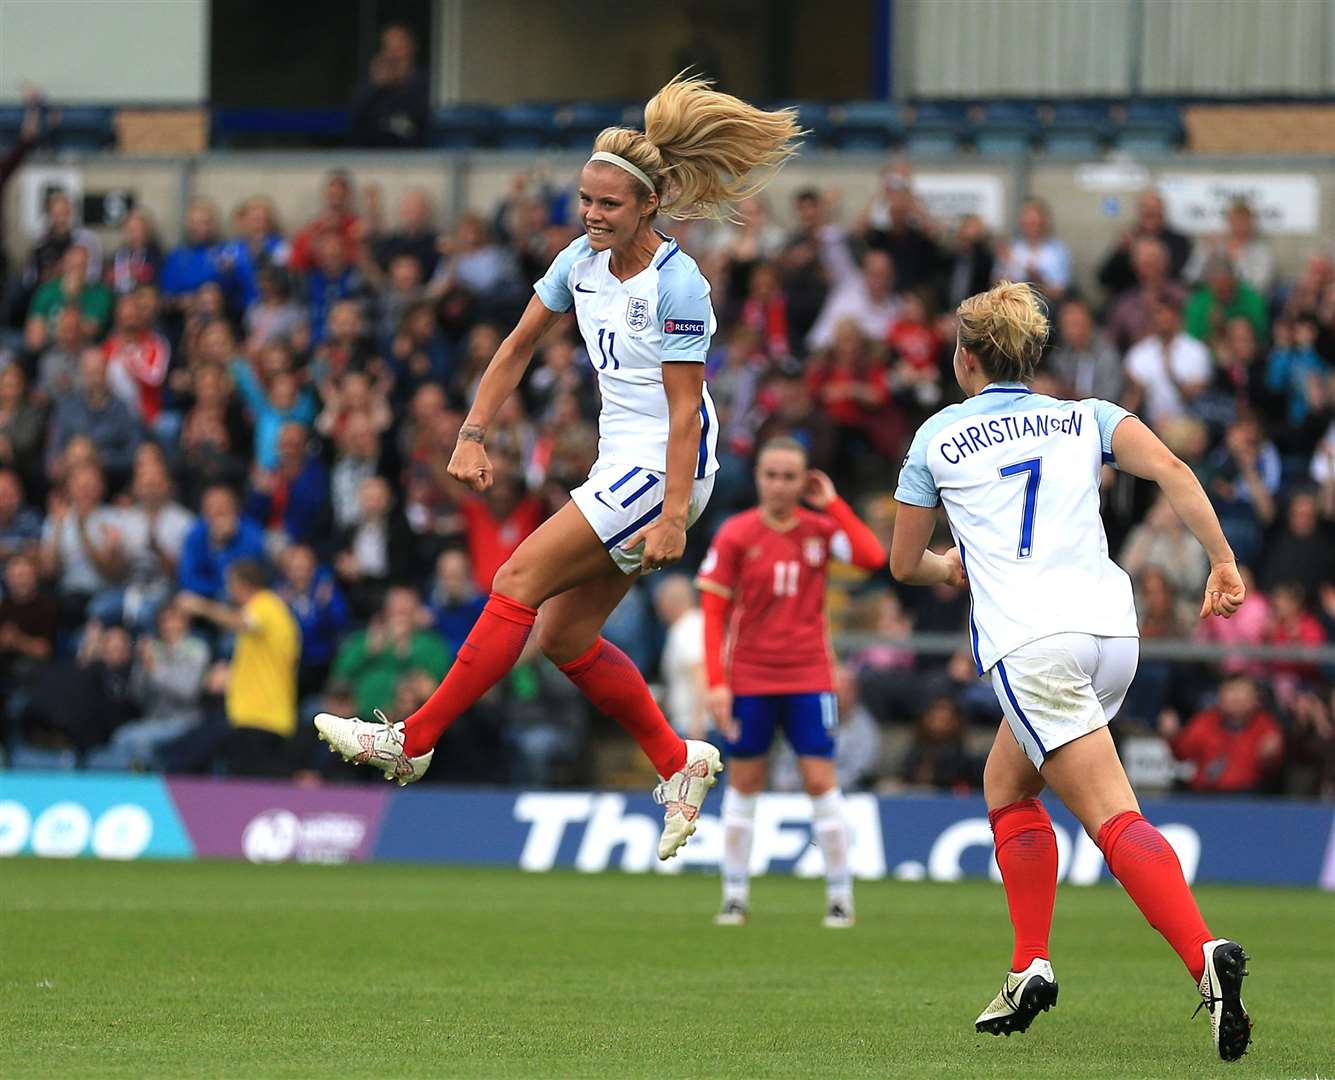 Daly jumps in the air as she celebrates scoring England’s third goal of the game during a 2017 Uefa Women’s European Championship qualifying match (PA)